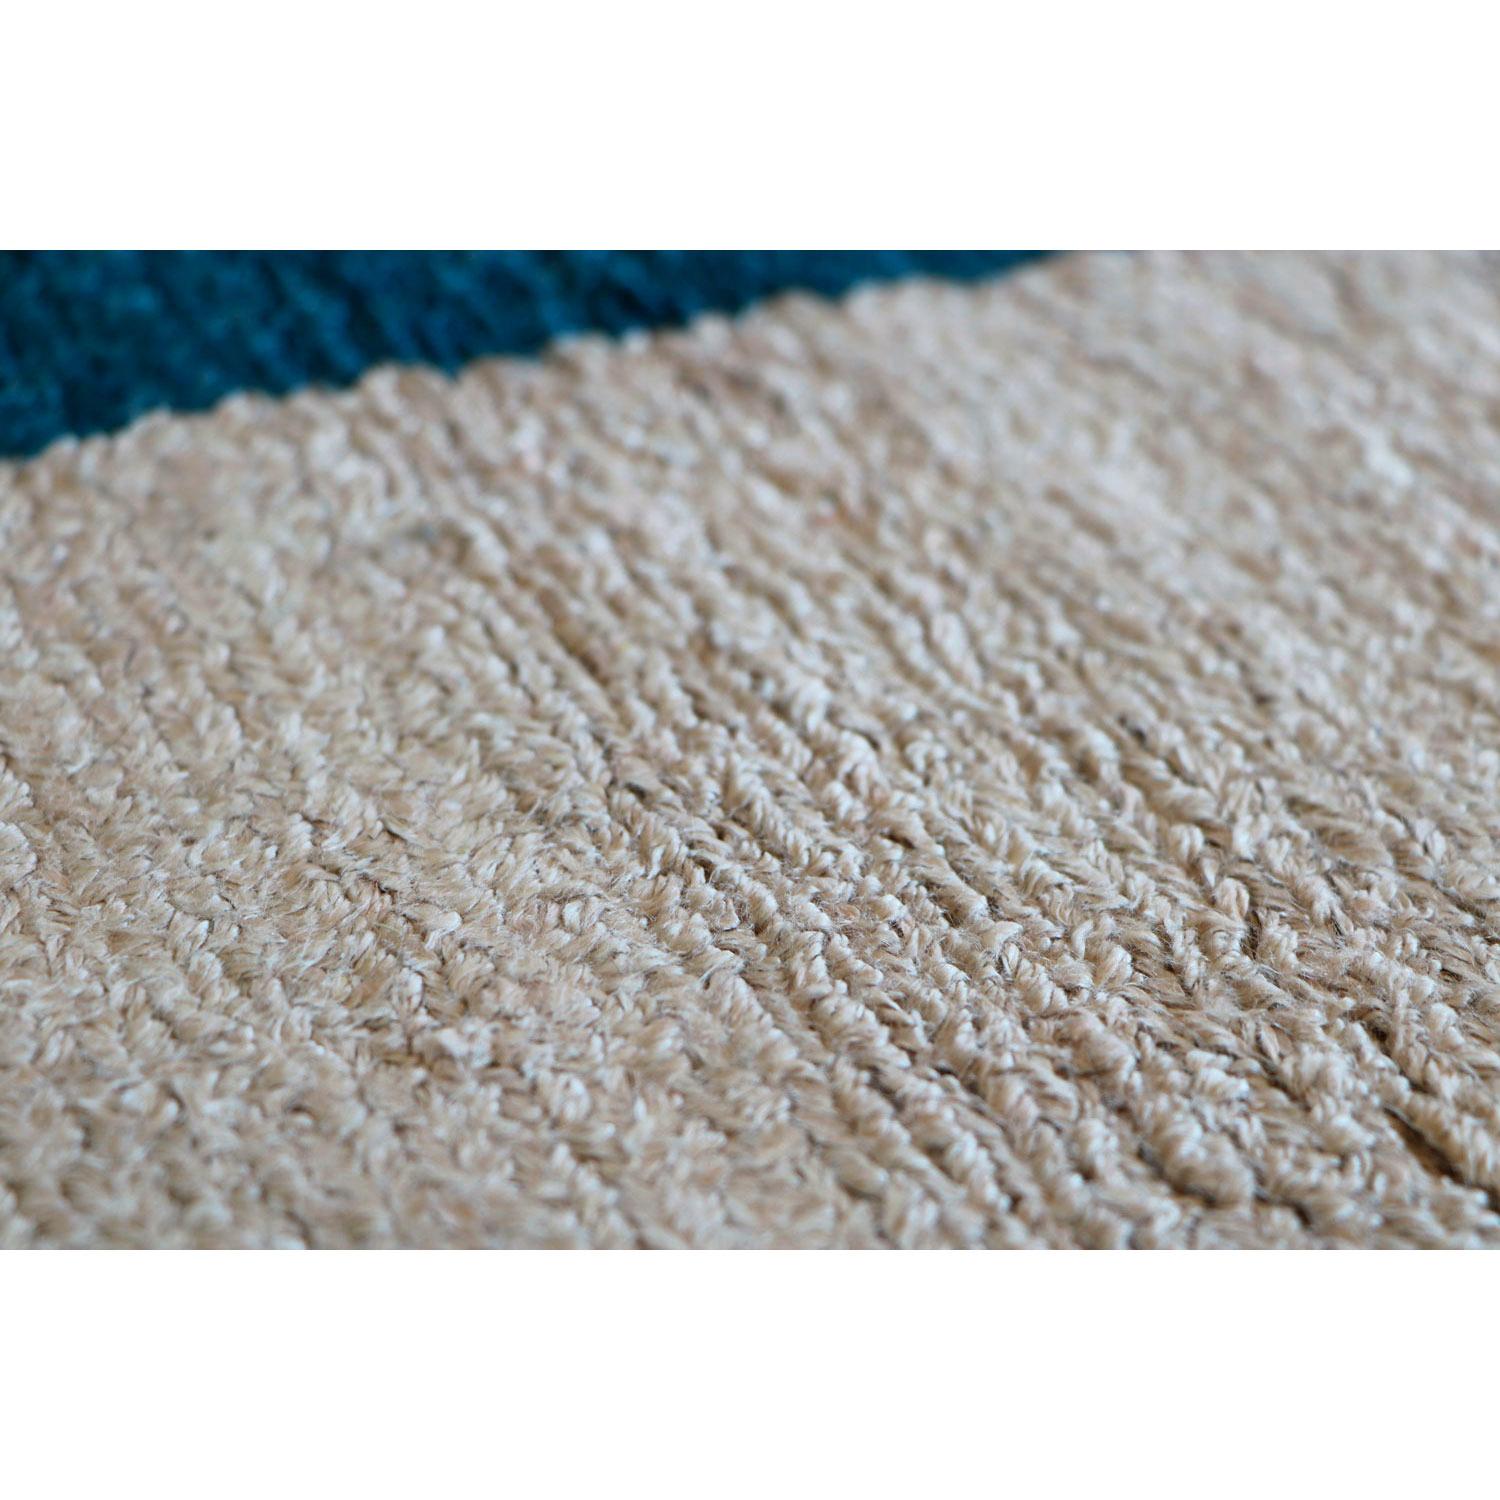 Contemporary 21st Cent Neutral Tones Linen Rug for Beach Houses by Deanna Comellini 120x300cm For Sale